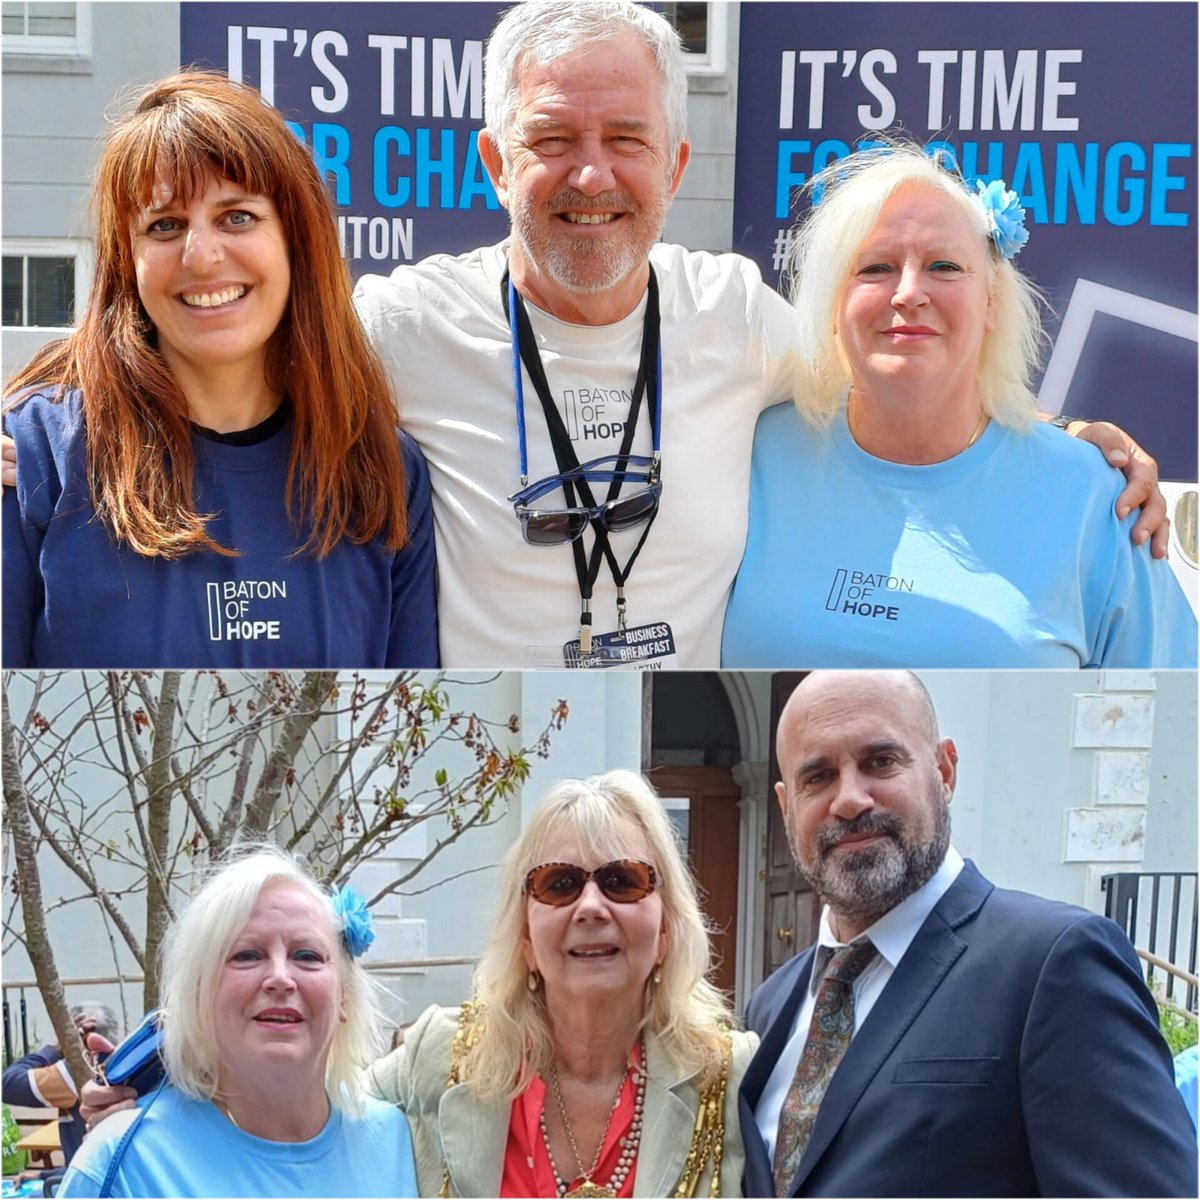 Heartfelt moments of Togetherness @BatonOfHopeUK suicide awareness 💔 Moving speech by Mayor of Brighton & Hove @jacquelquinn Rose Howkins - Project Lead, Mike McCarthy founder of #batonofhopeuk, me as event host. Support from @marcthevet with 1000s across the city today.